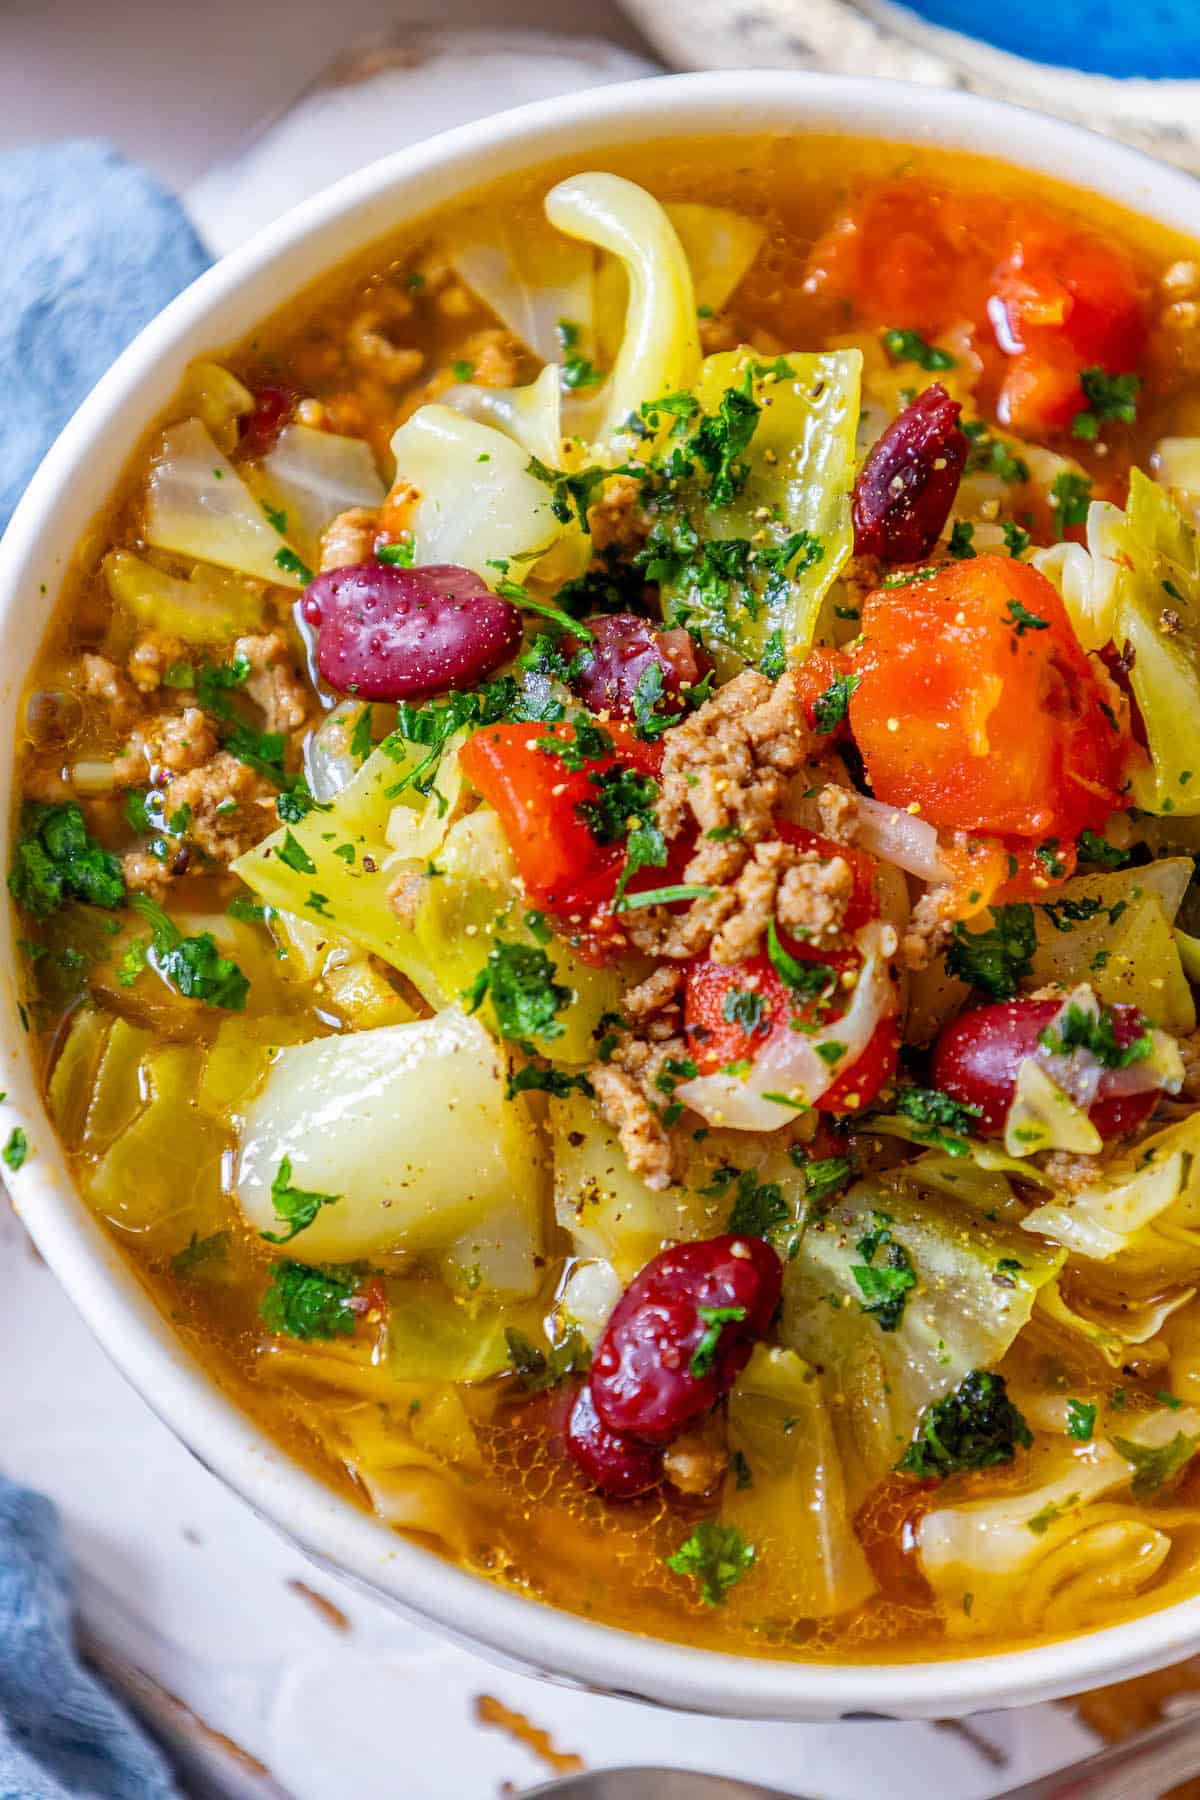 Cabbage soup with meat and beans.